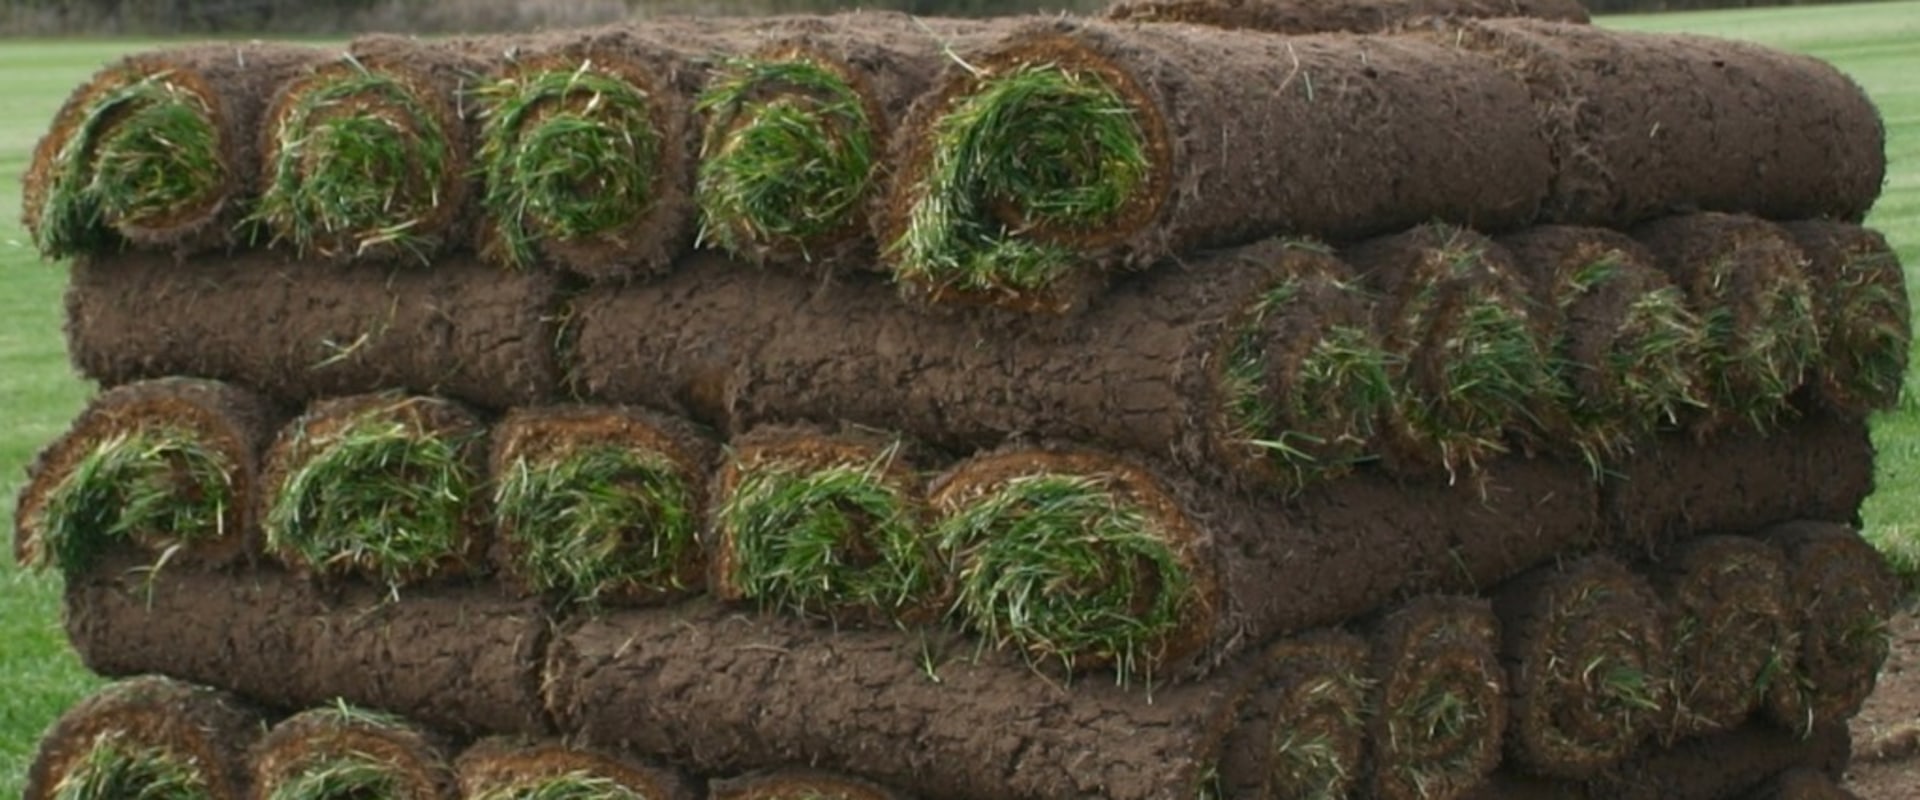 What are those rolls of grass called?